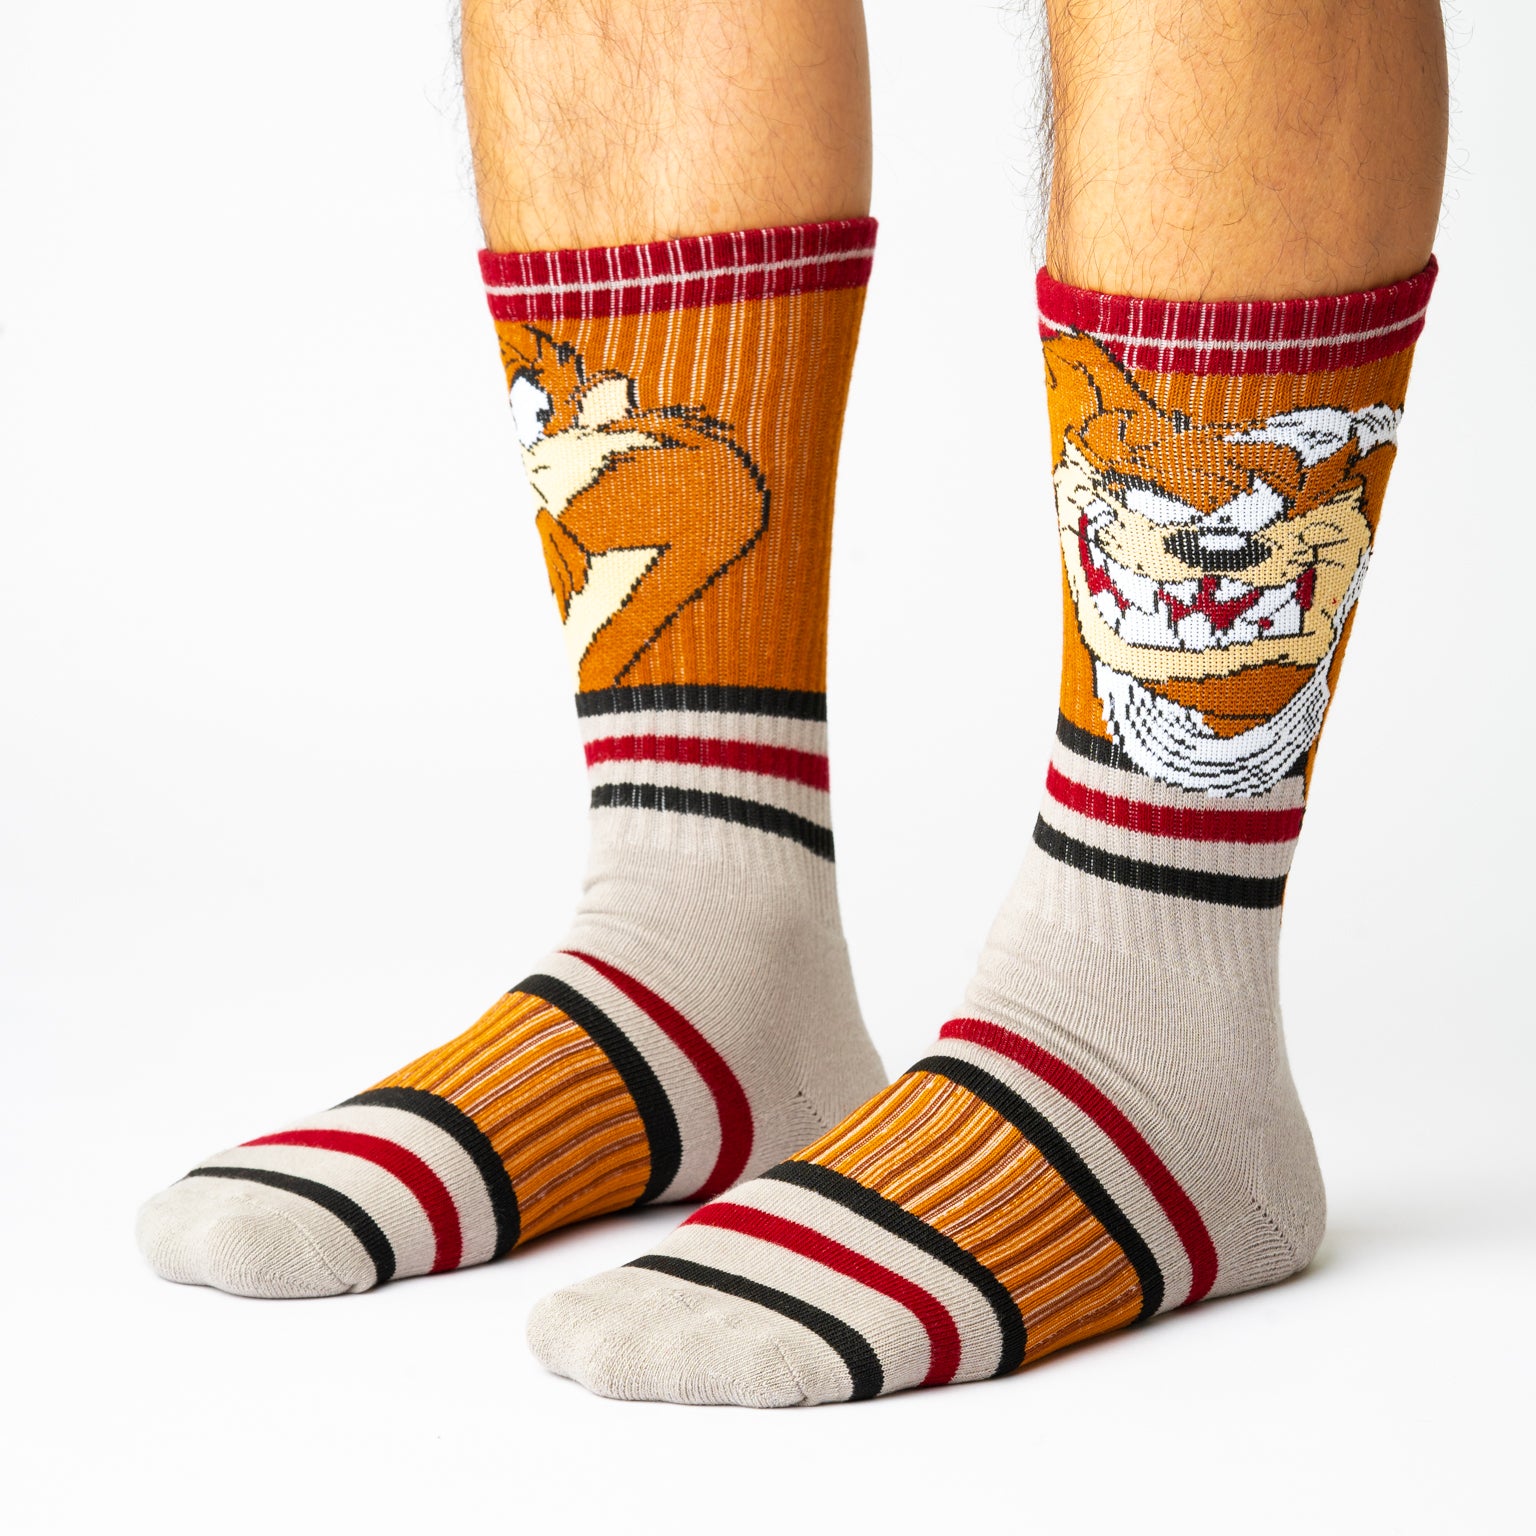 Discover Our Full Range of Socks from SWAG Boxers